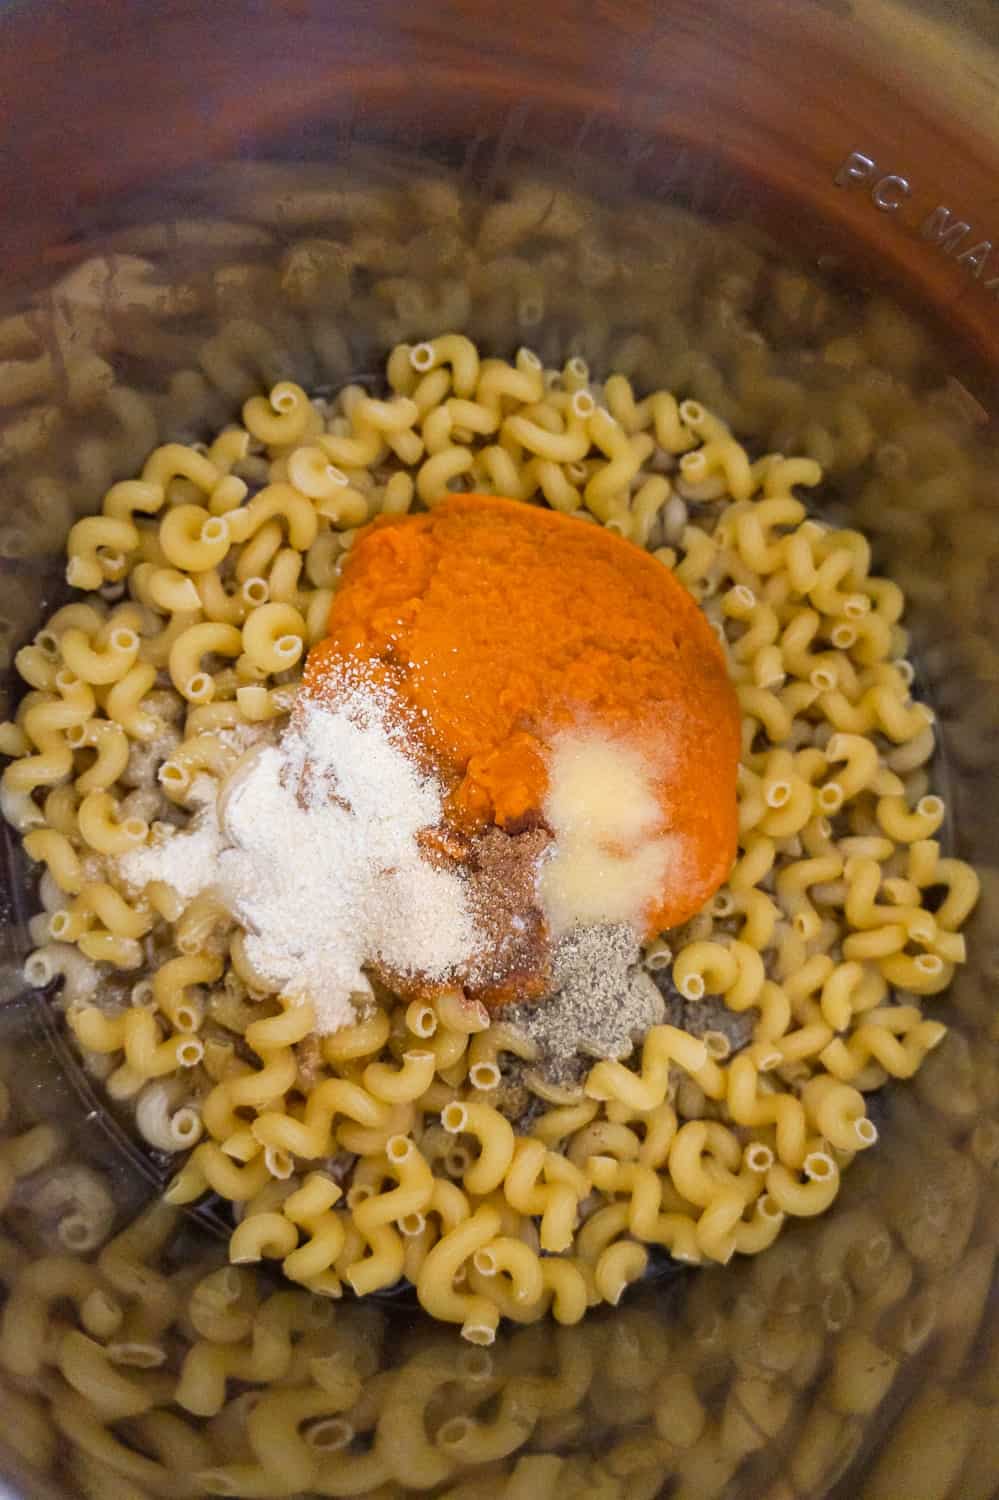 canned pumpkin and spices on top of cavatappi noodles in an Instant Pot before cooking